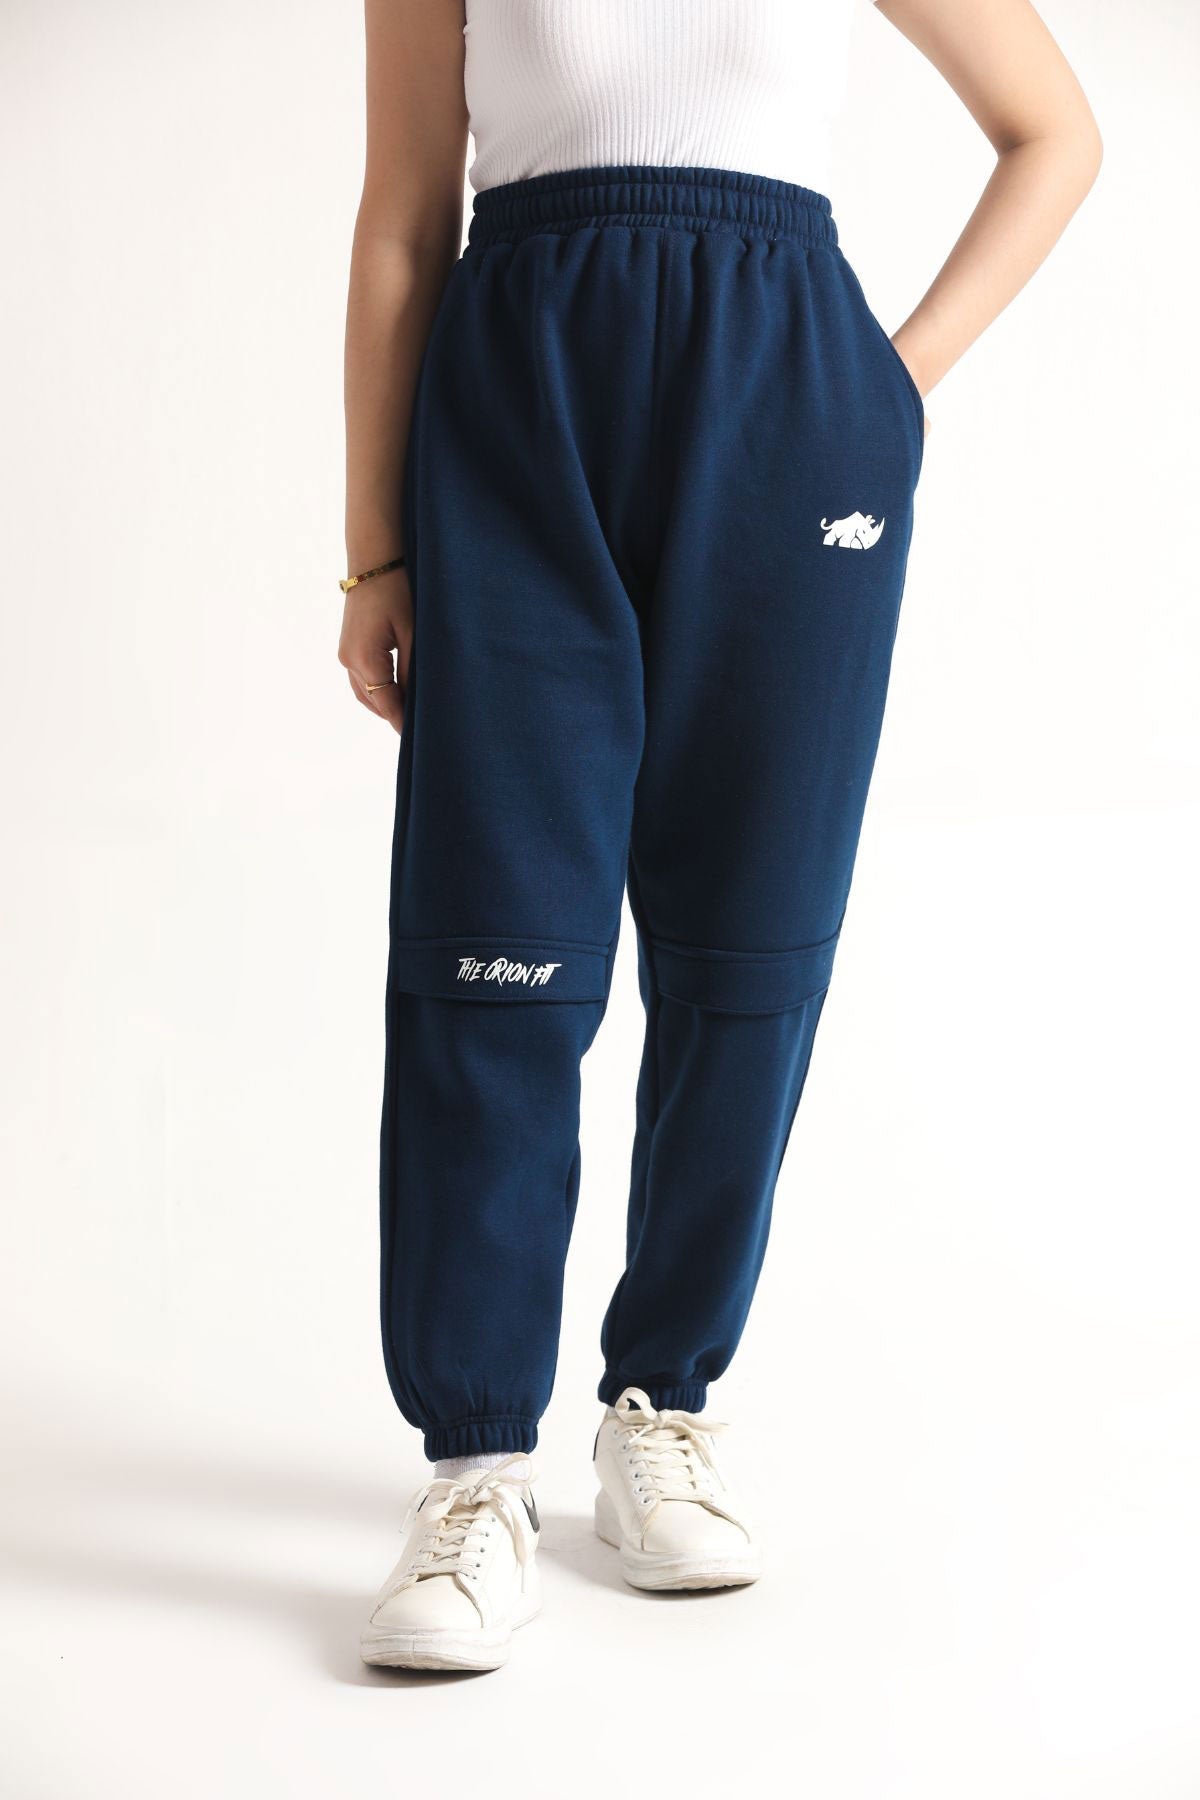 SCULPT ULTRA COMFORT CARGO TROUSERS- NAVY BLUE - The Orion Fit